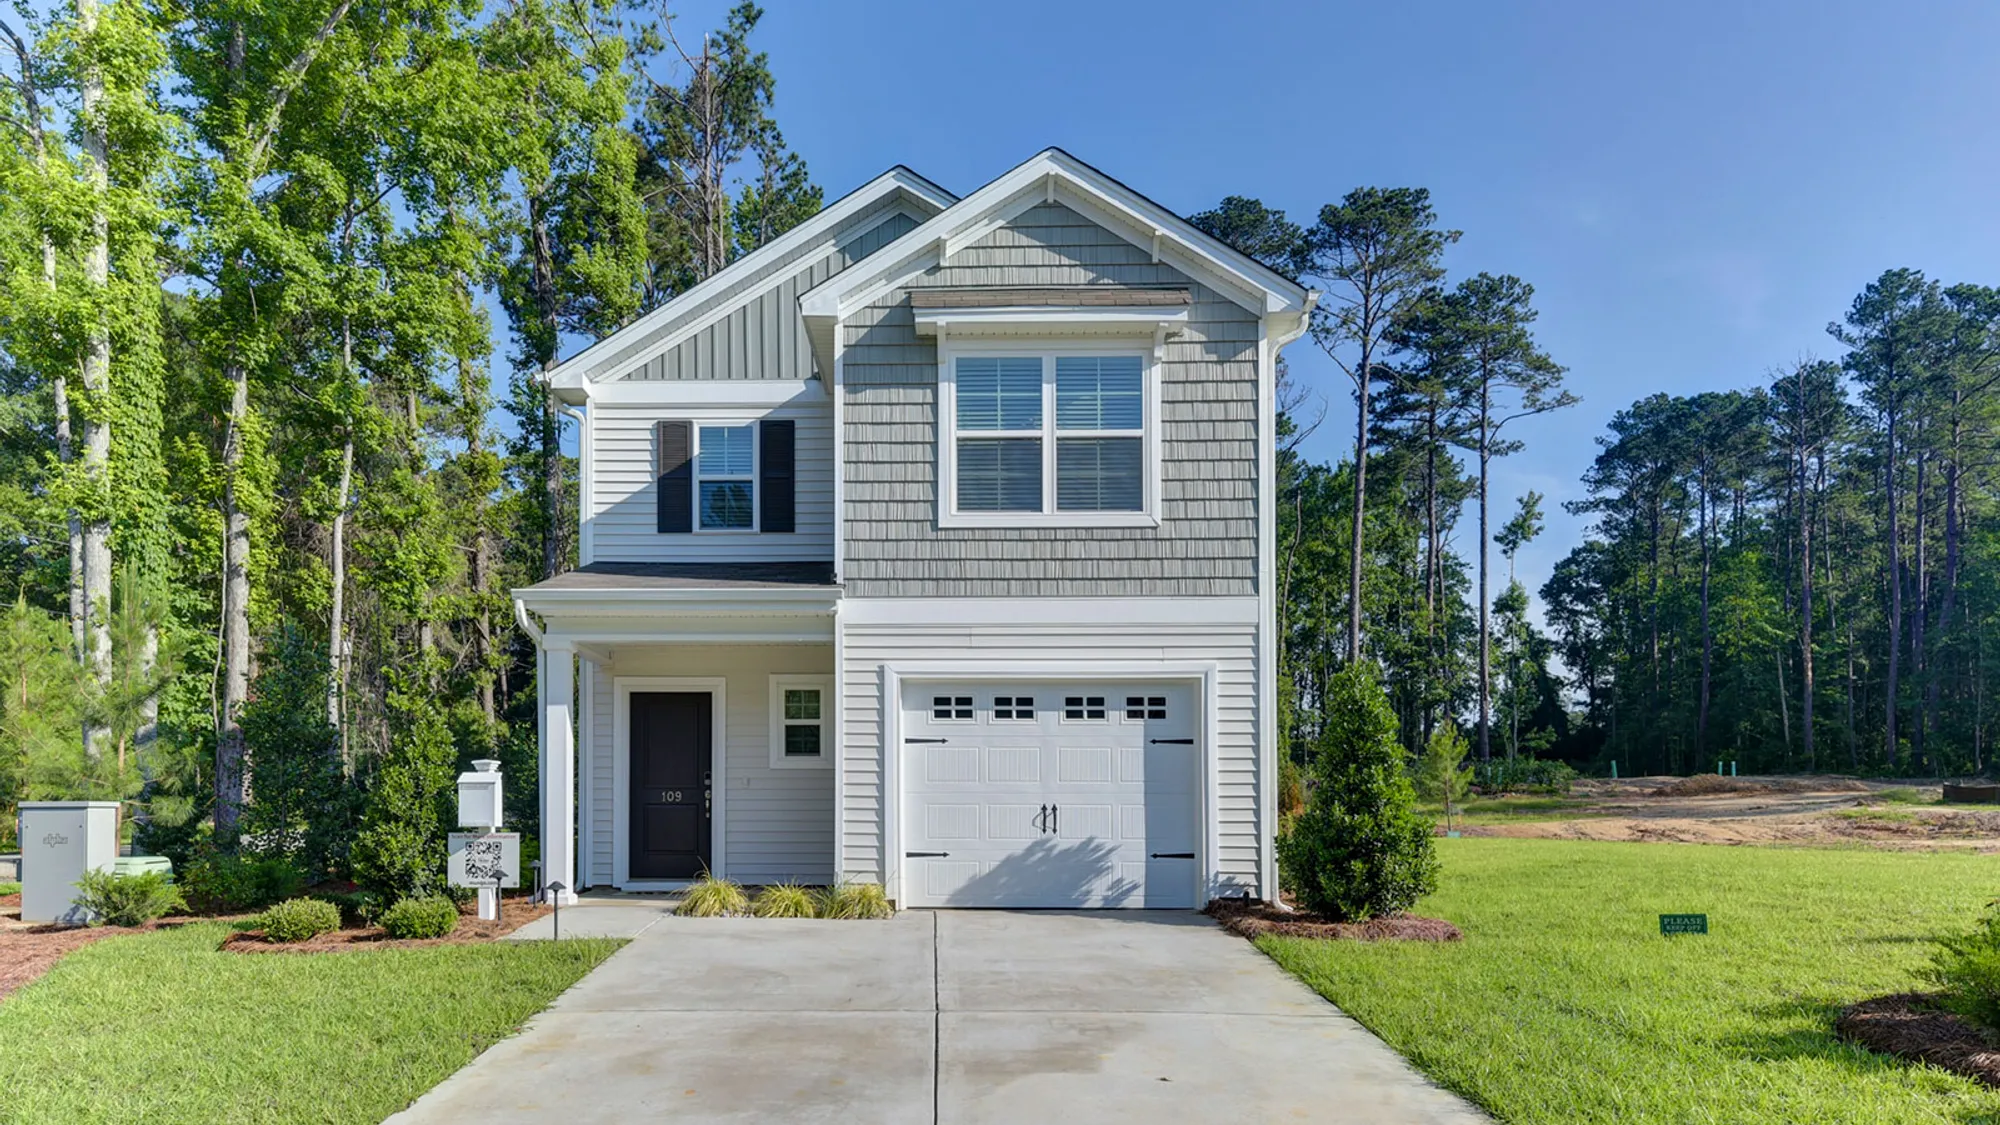 New home for sale in Lexington SC featuring Mungo's Dawson Plan